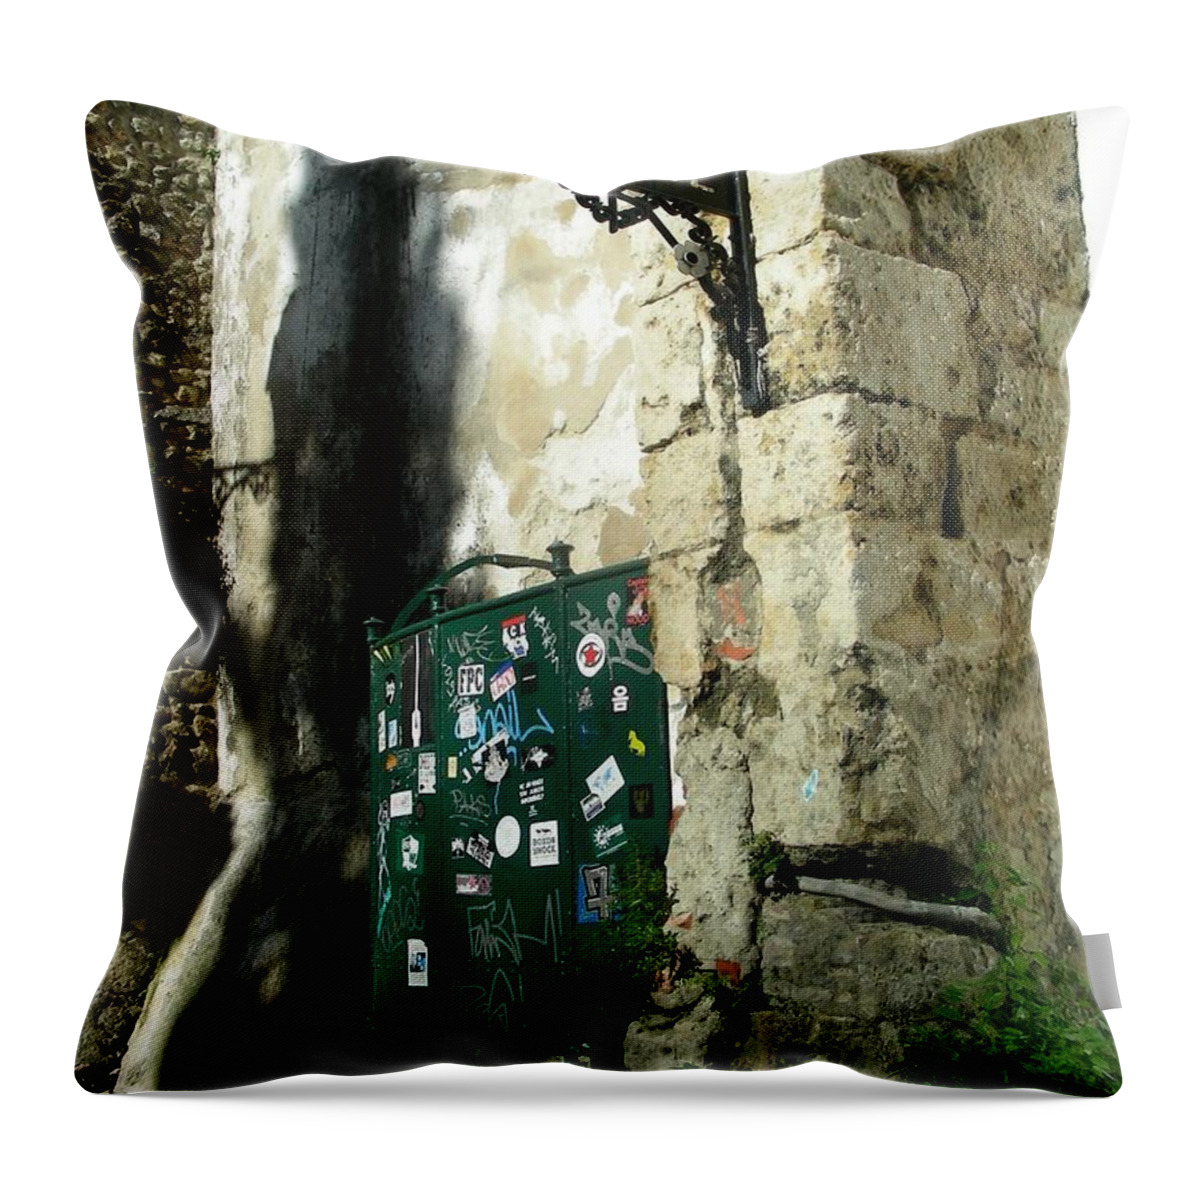 Men's Room Throw Pillow featuring the photograph Men's Room by Jean Wolfrum